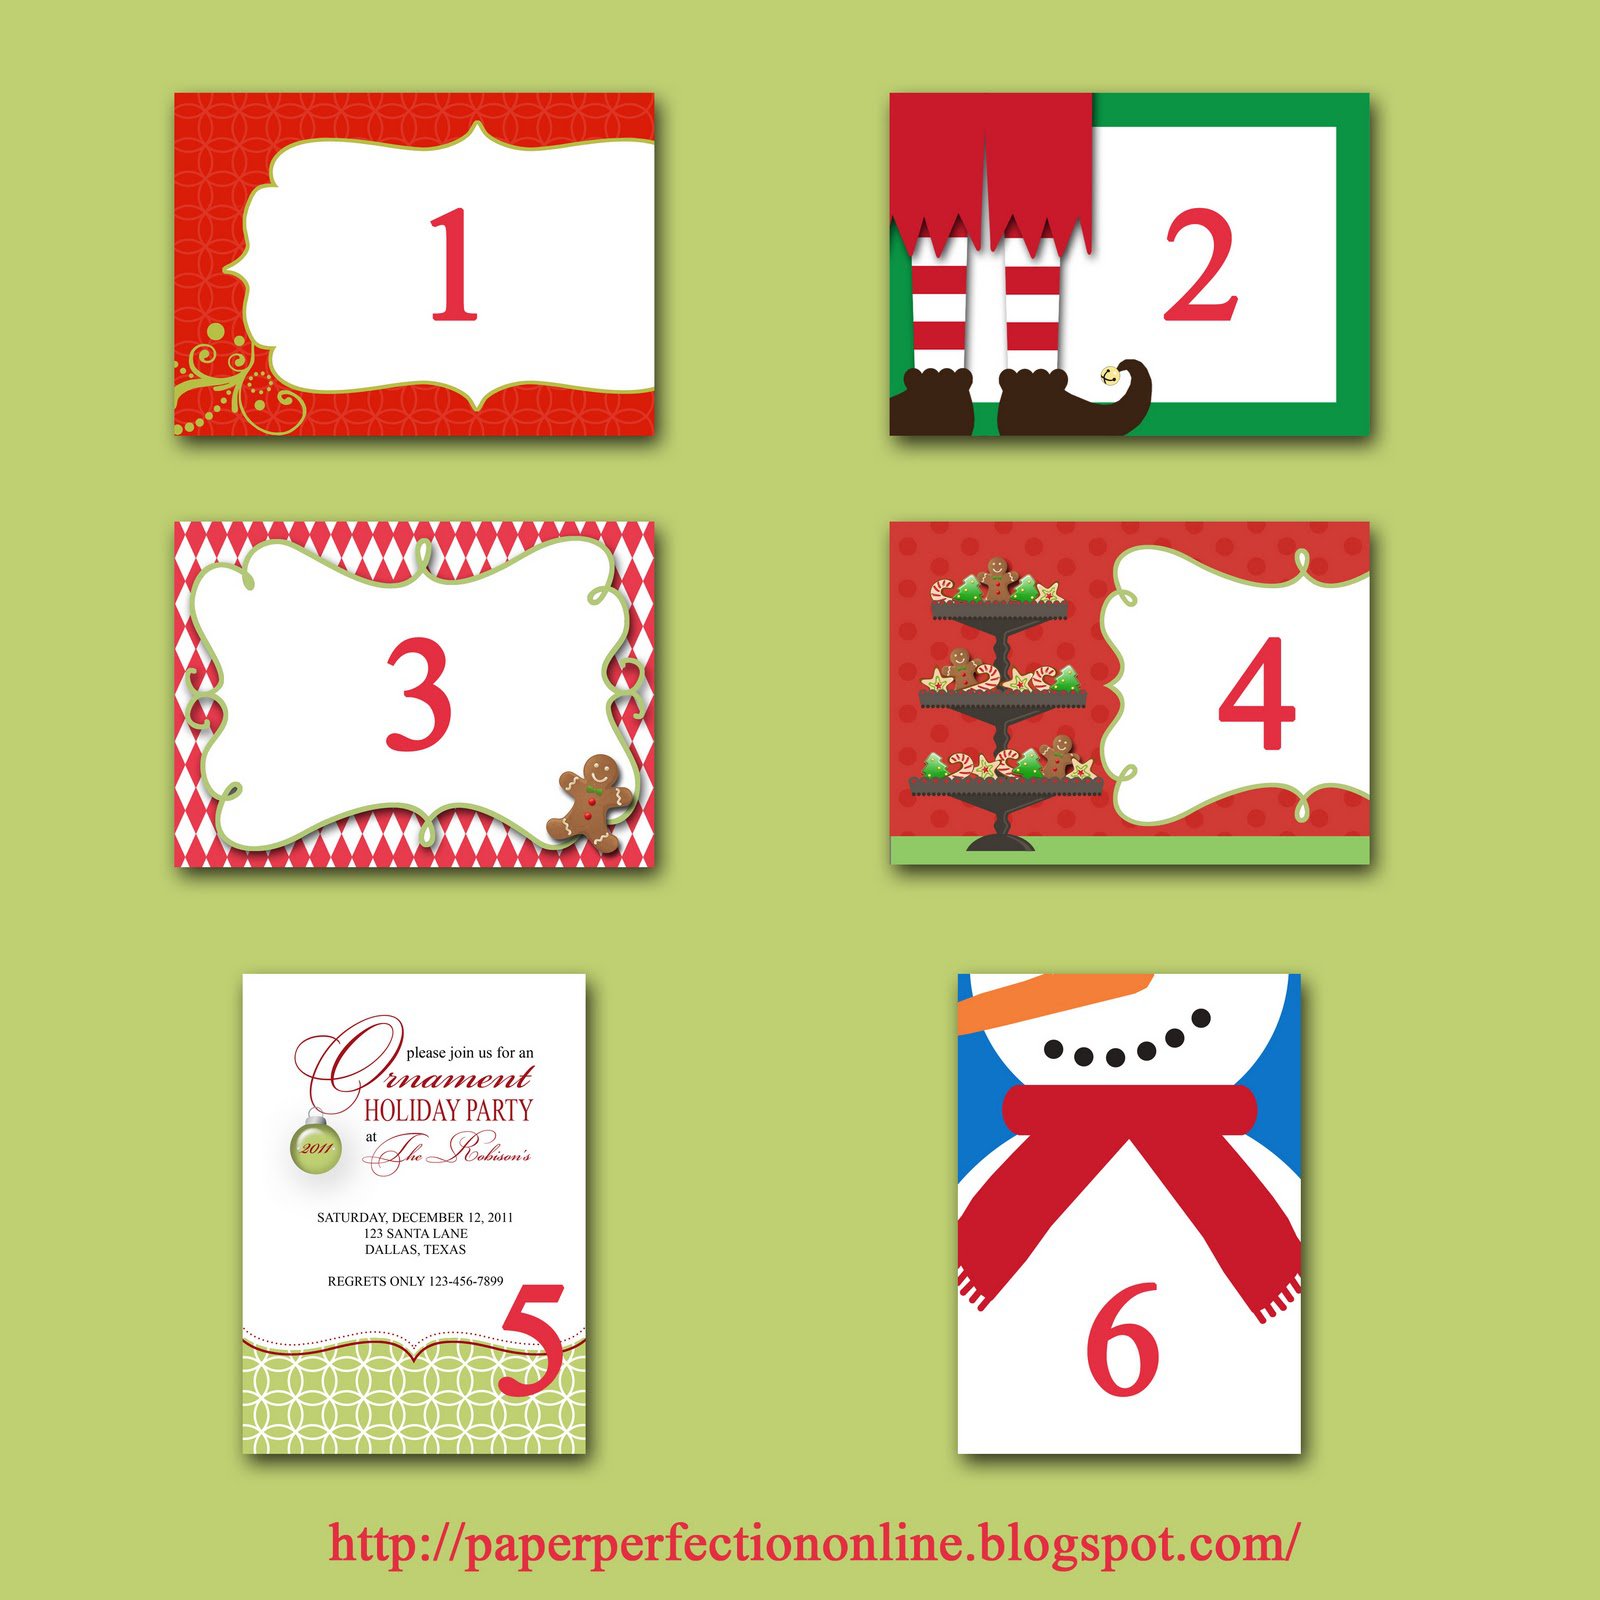 Examples Of Company Christmas Party Invitations